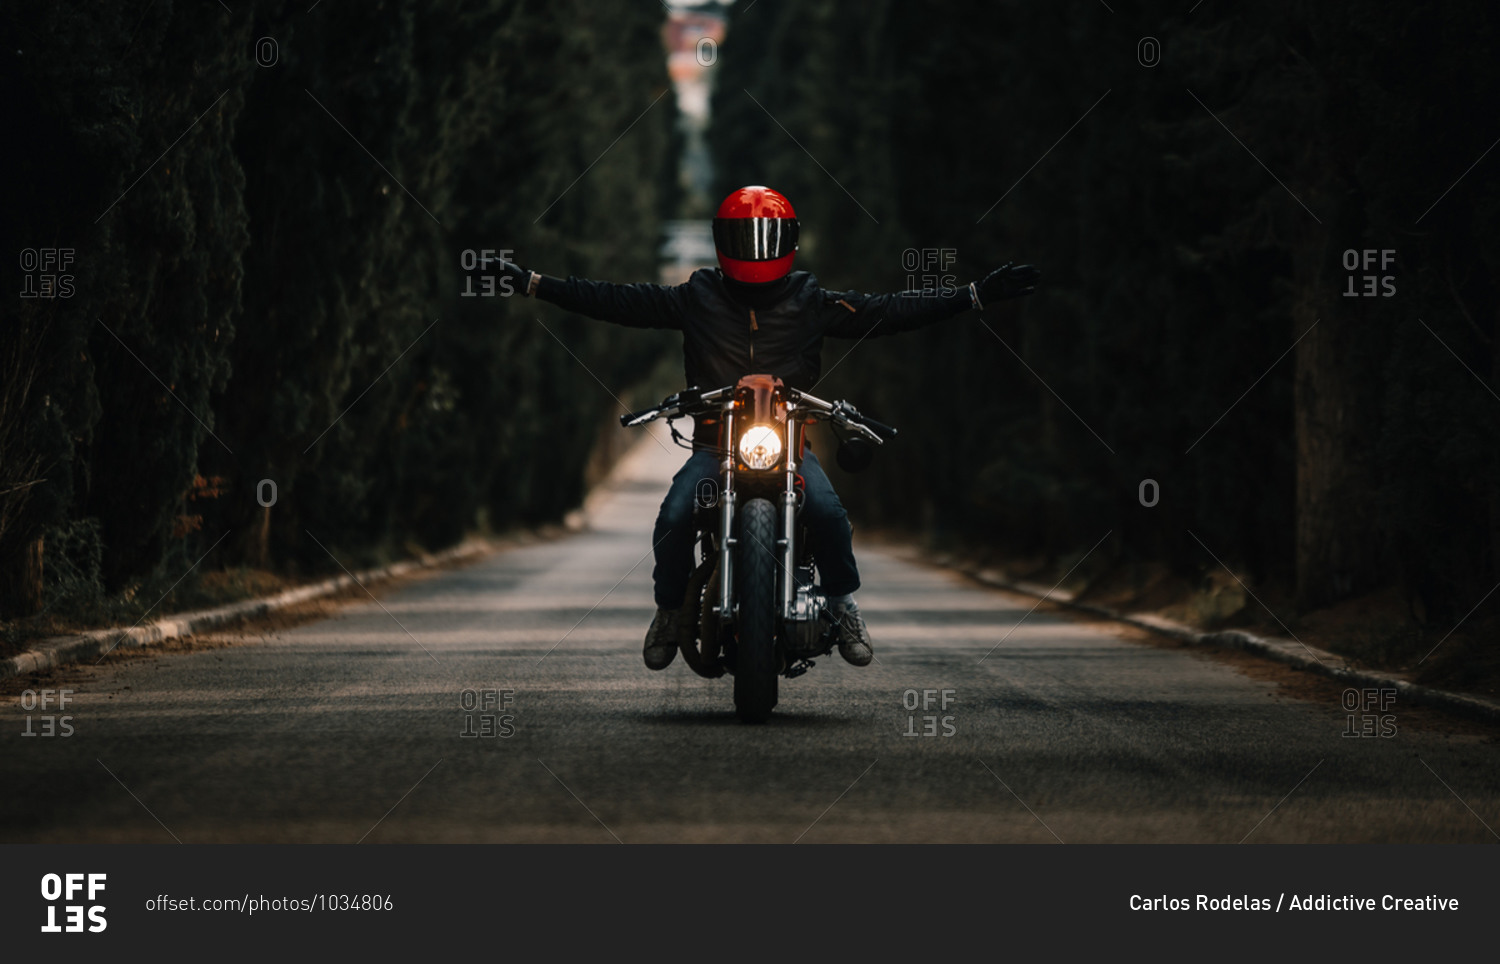 Biker in black leather jackets and helmet with open arms riding powerful motorcycle on asphalt road leading between green forest in countryside